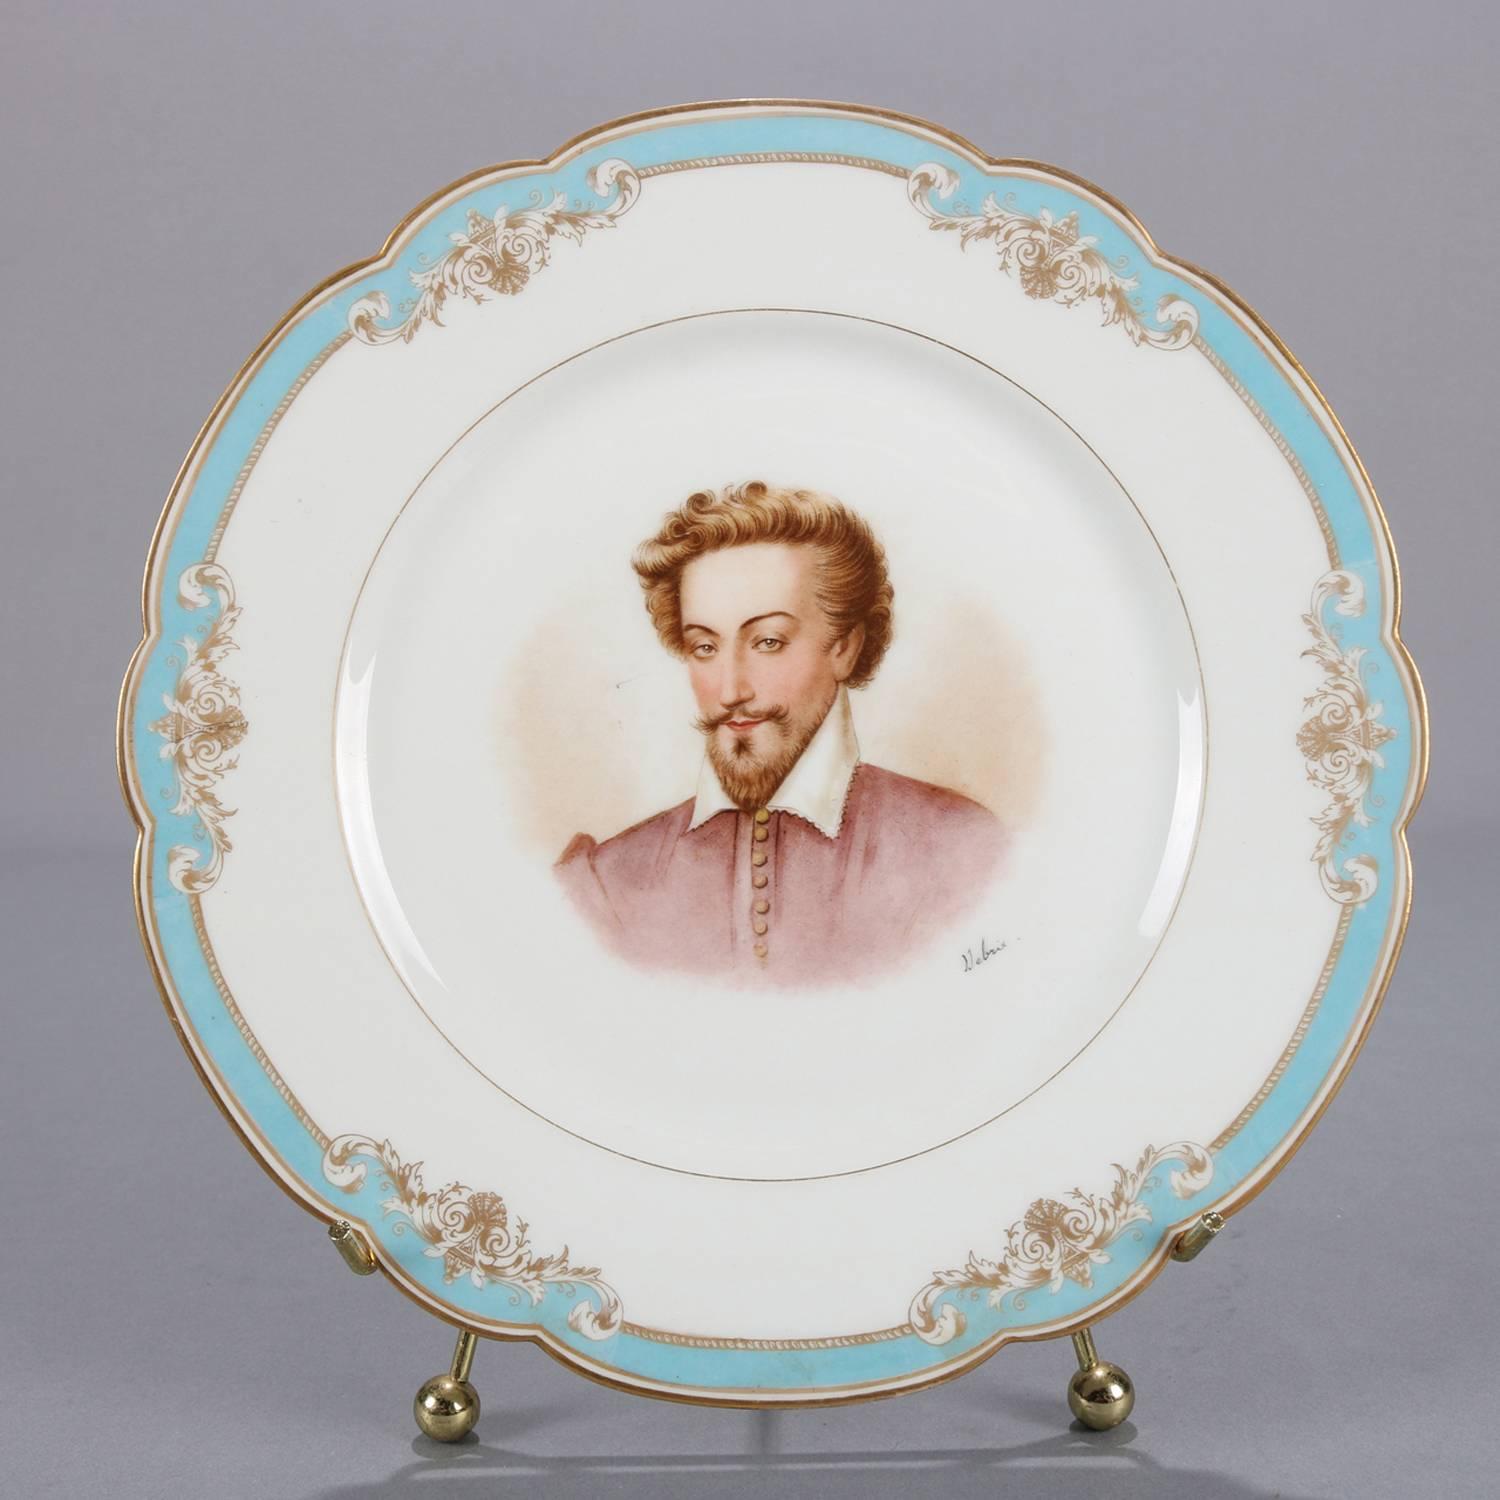 Antique French portrait plate by Sevres for Chateau de St Cloud features well with central artist signed portrait of Henry IV by Debrie and framed, rim with gilt scalloped edges and decorated blue and foliate gilt motif, en verso stamped 